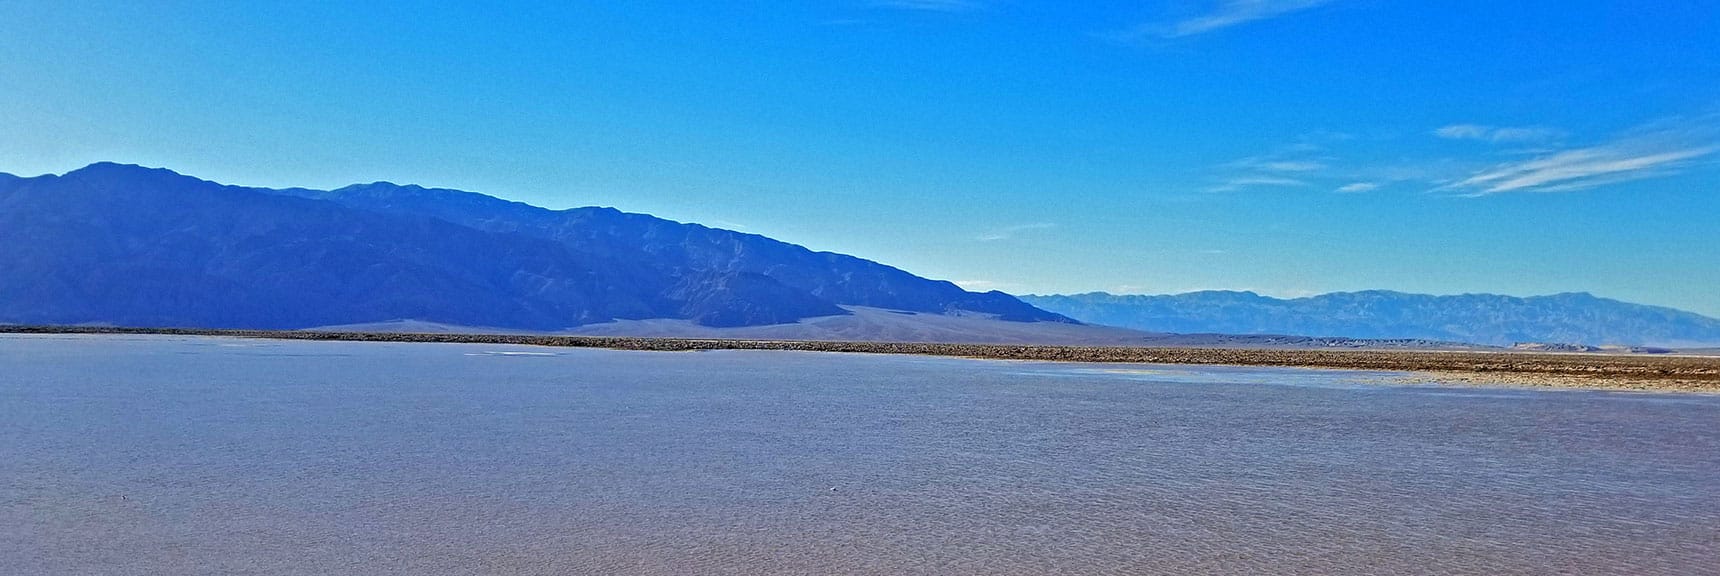 Looking Across the Lake Toward the Northern Edge of the Panamint Range. | Return of Lake Manly (Lake in Death Valley) | Death Valley National Park, California